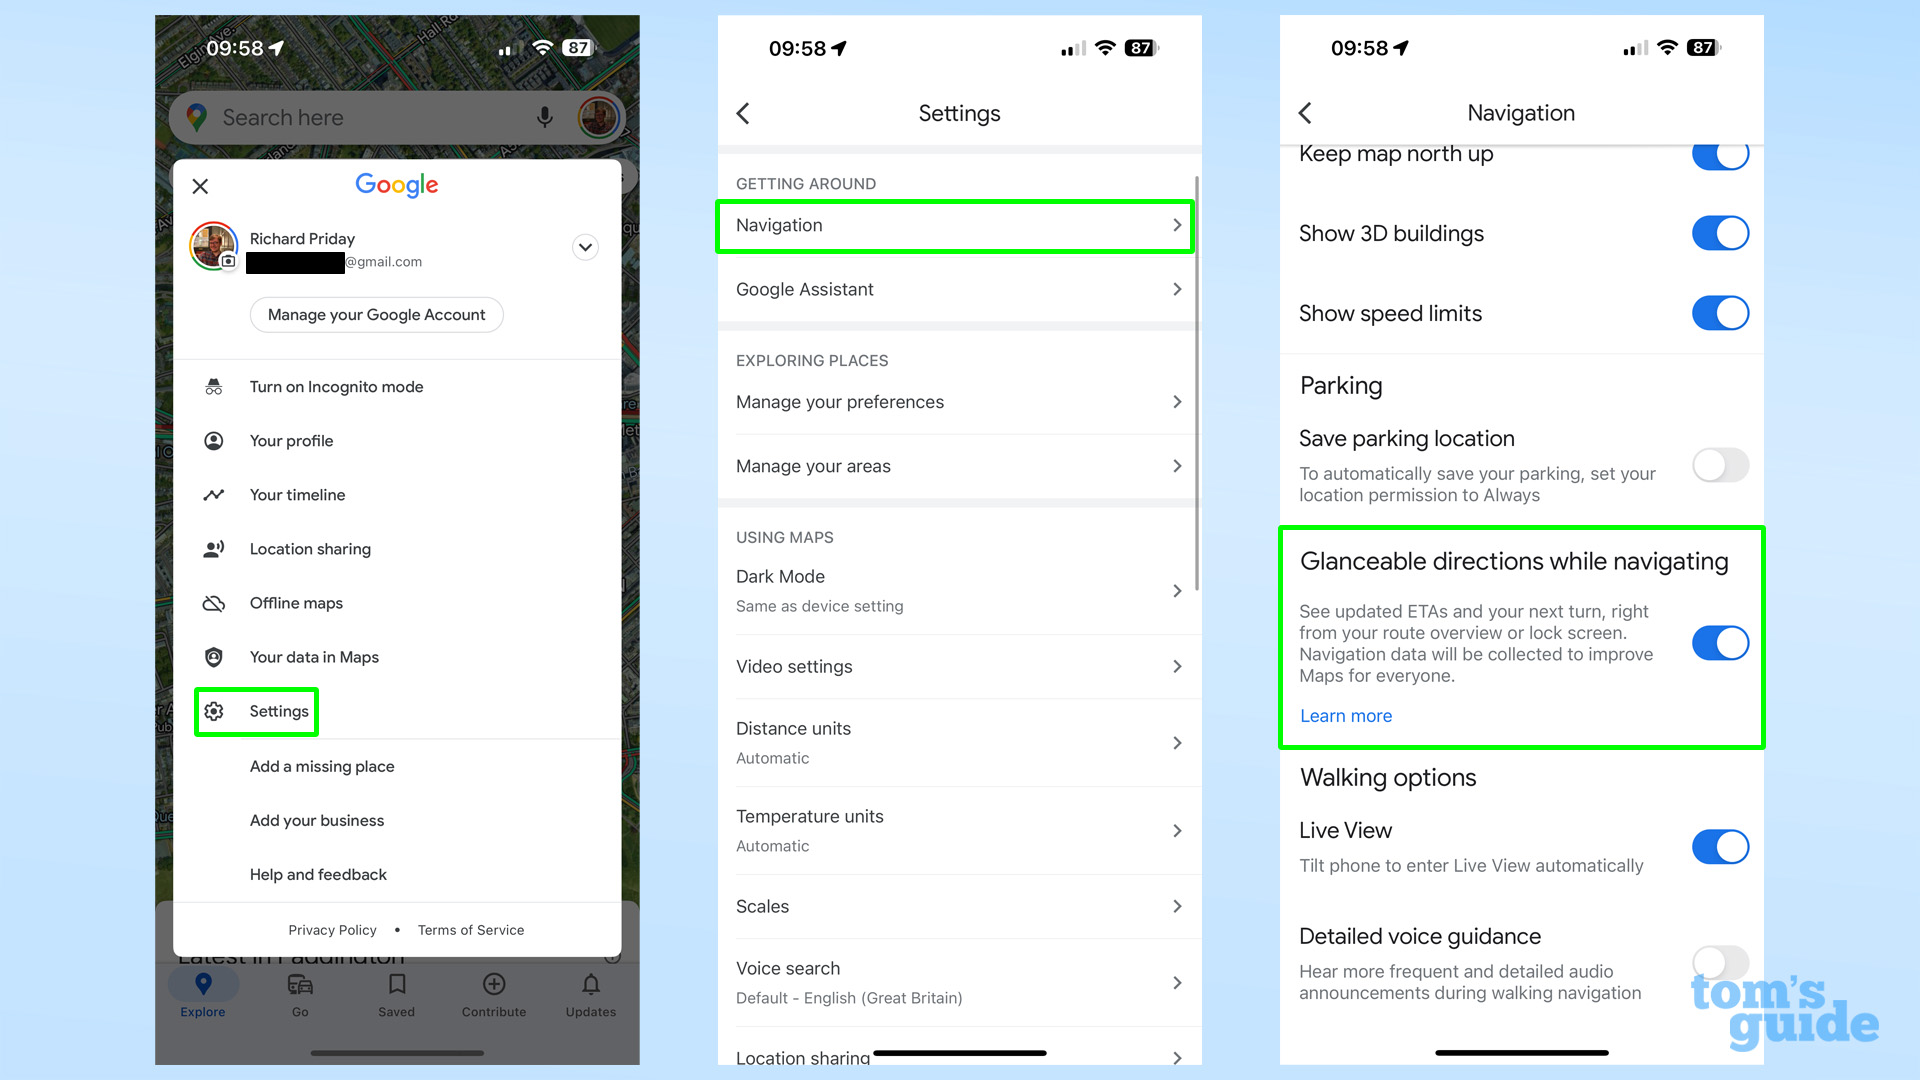 Screenshots showing how to enable the Glanceable Directions setting in Google Maps